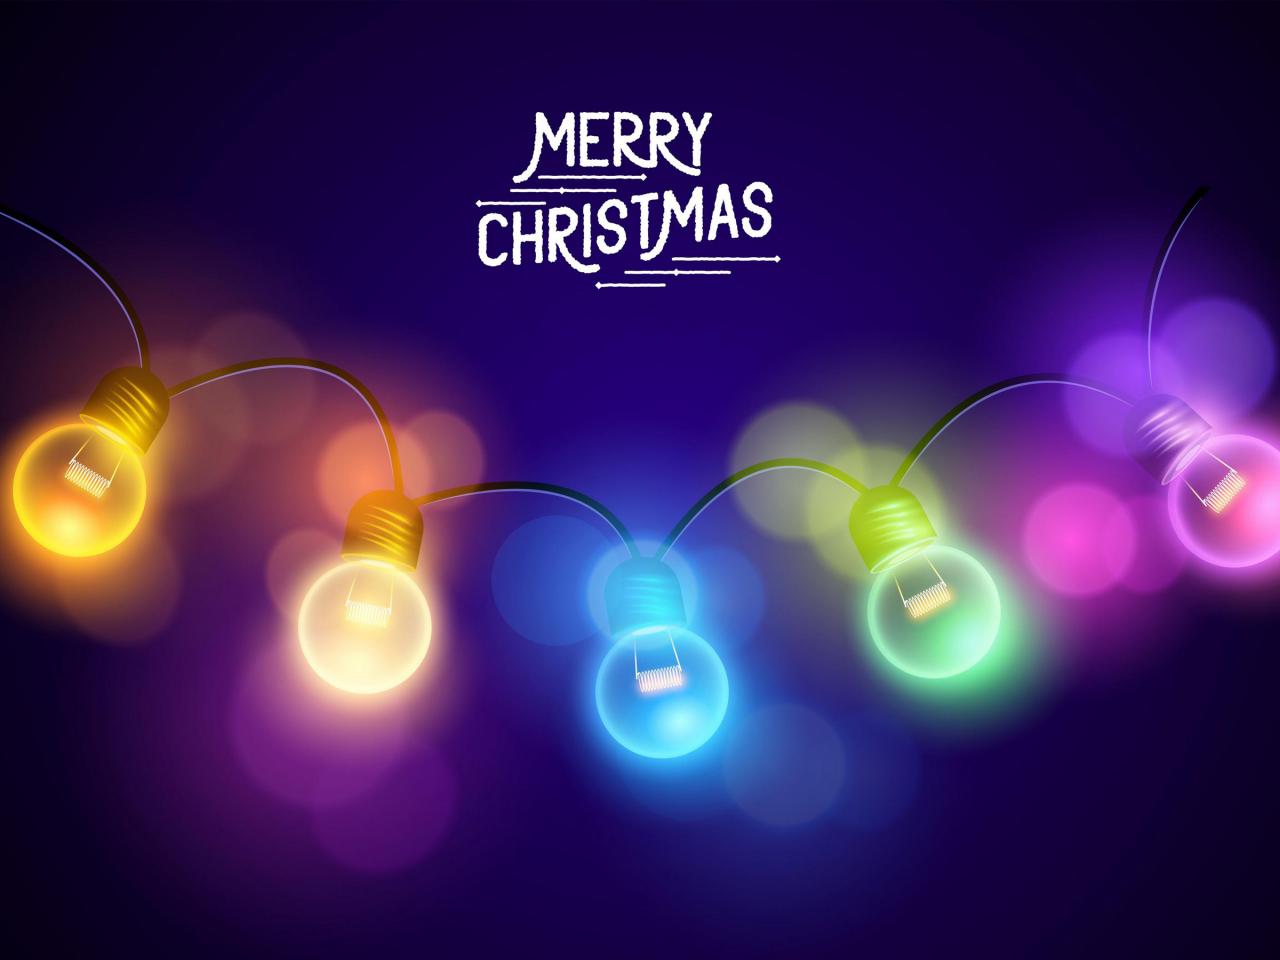 Desktop Wallpaper Merry Christmas Lights, Hd Image, Picture, Background, Rnmwi7